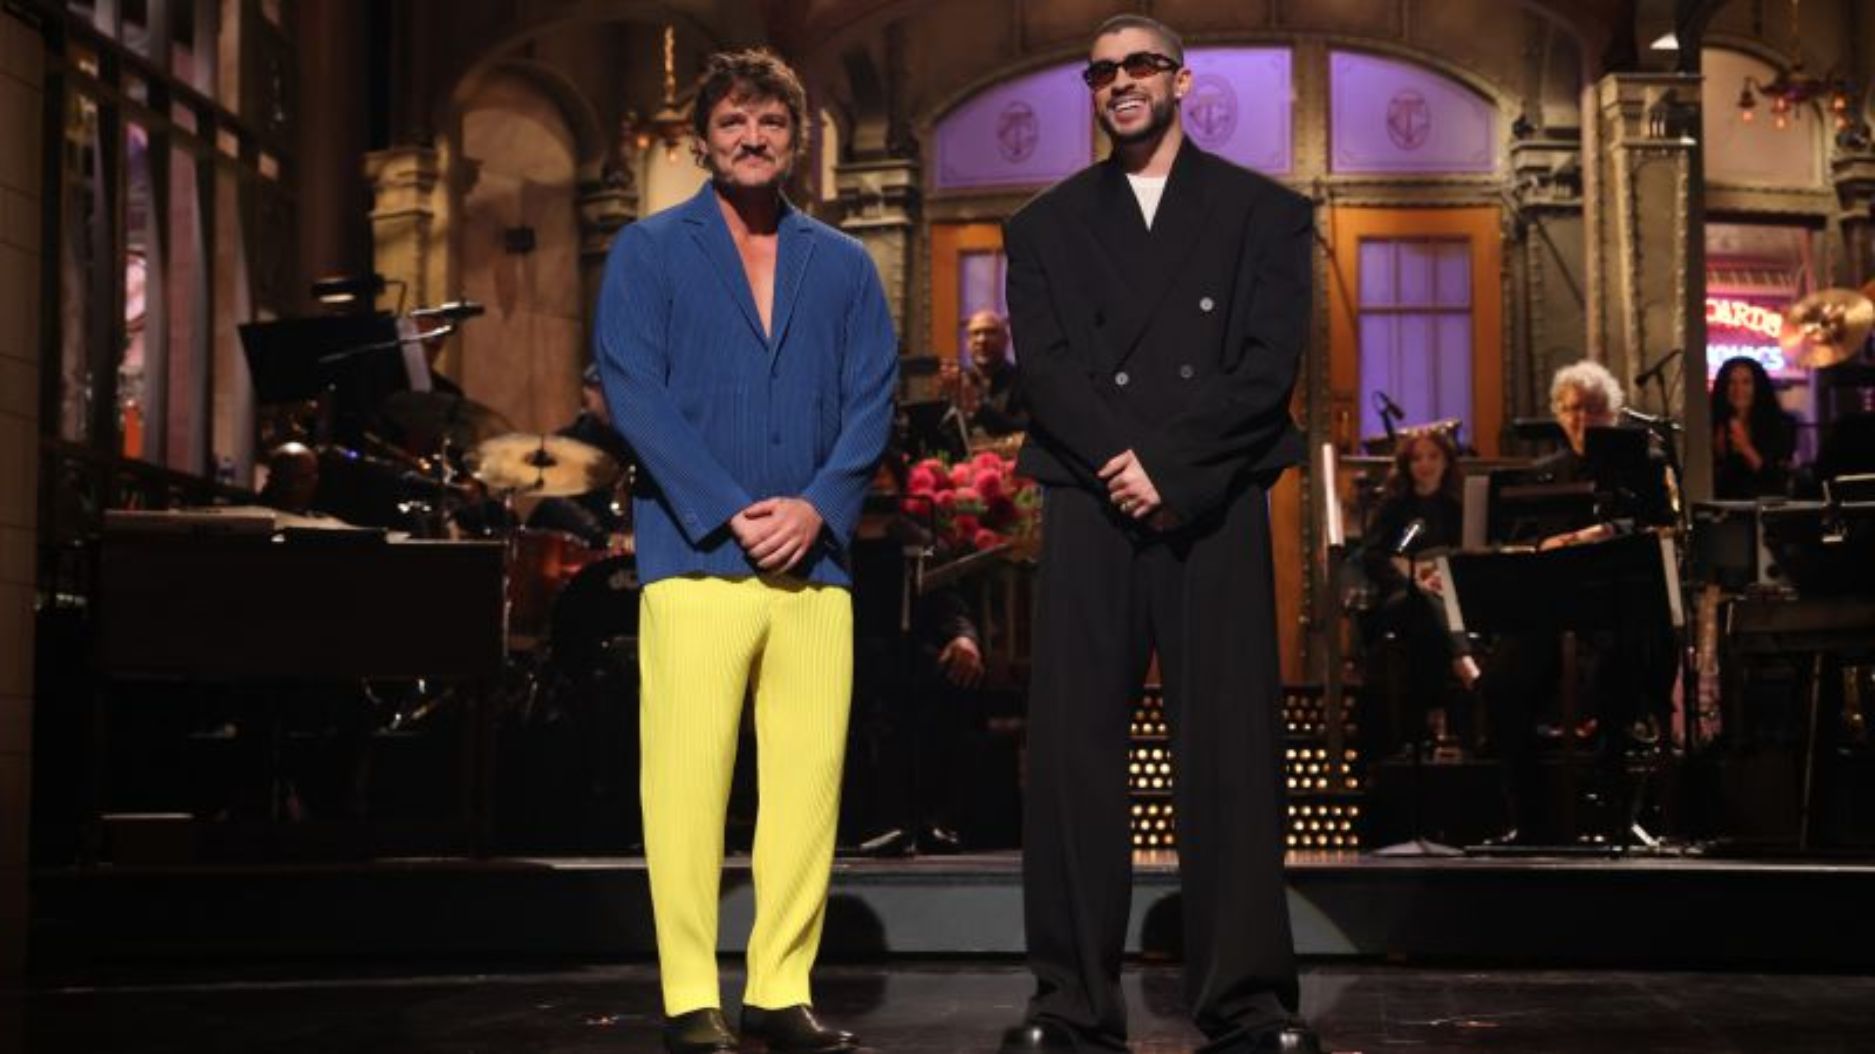 Pedro Pascal appeared on “SNL” to help with Bad Bunny’s monologue